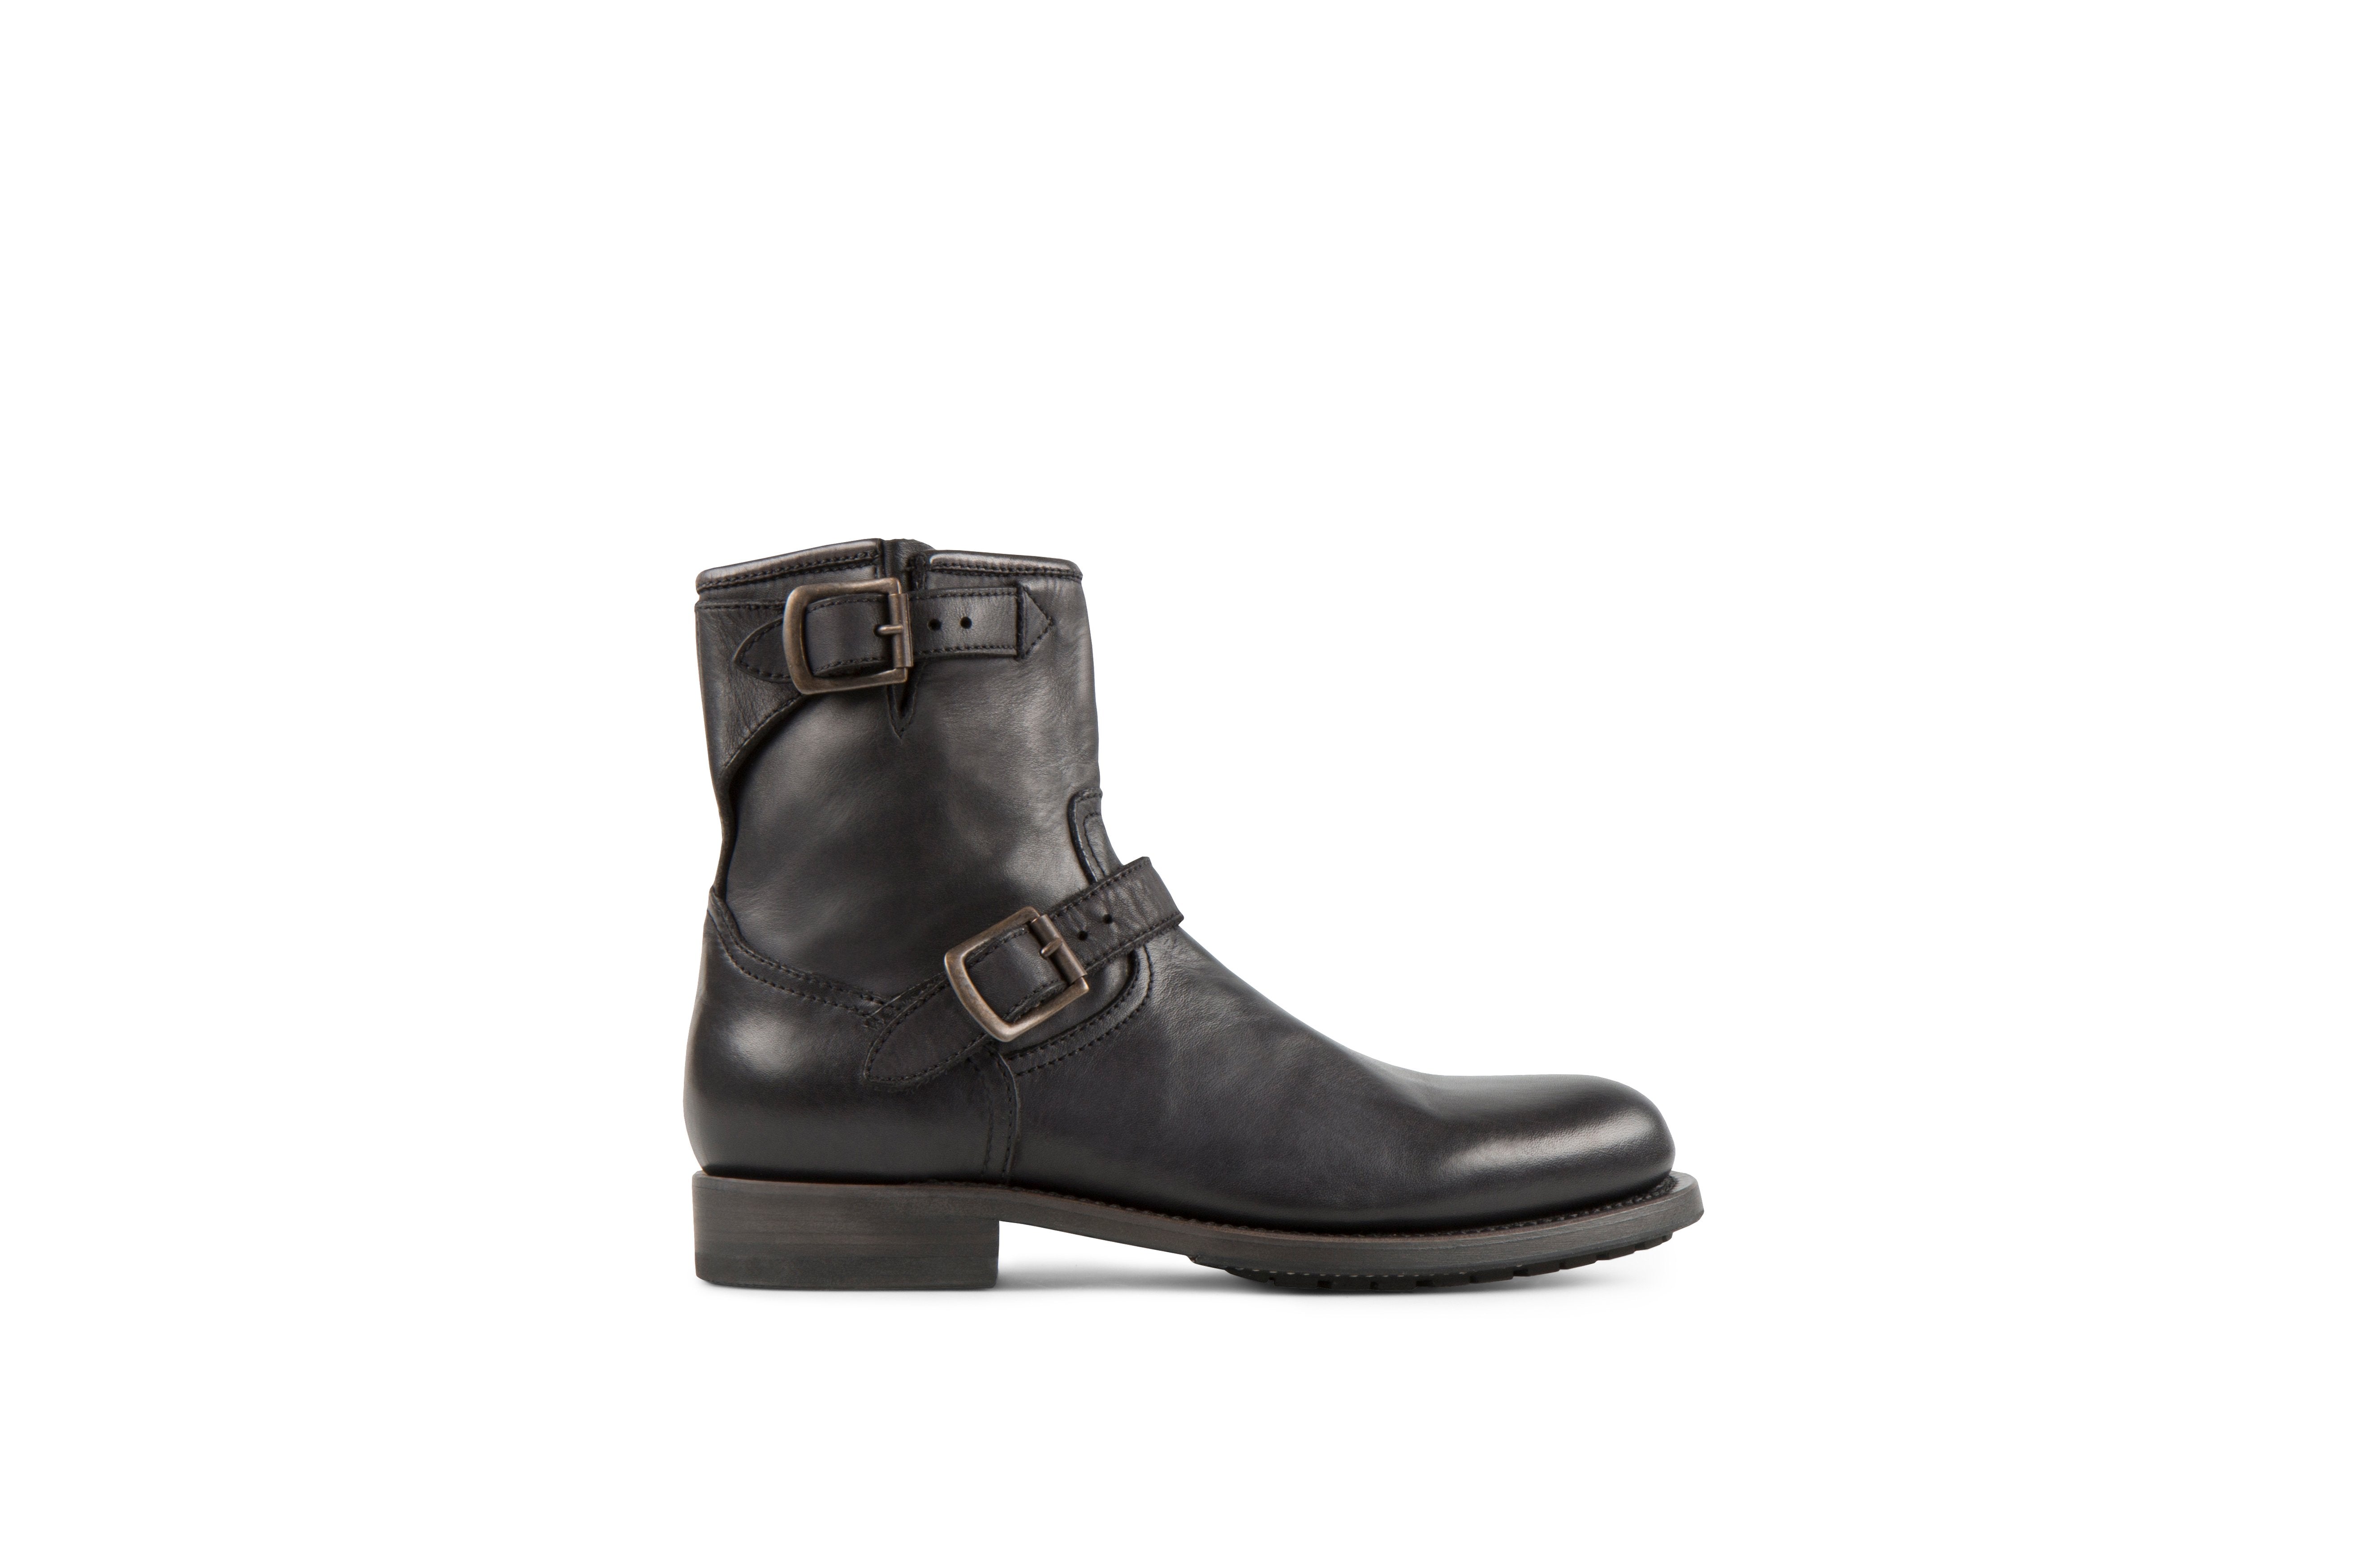 Lowrider Black Washed Calf Leather Rock Boots